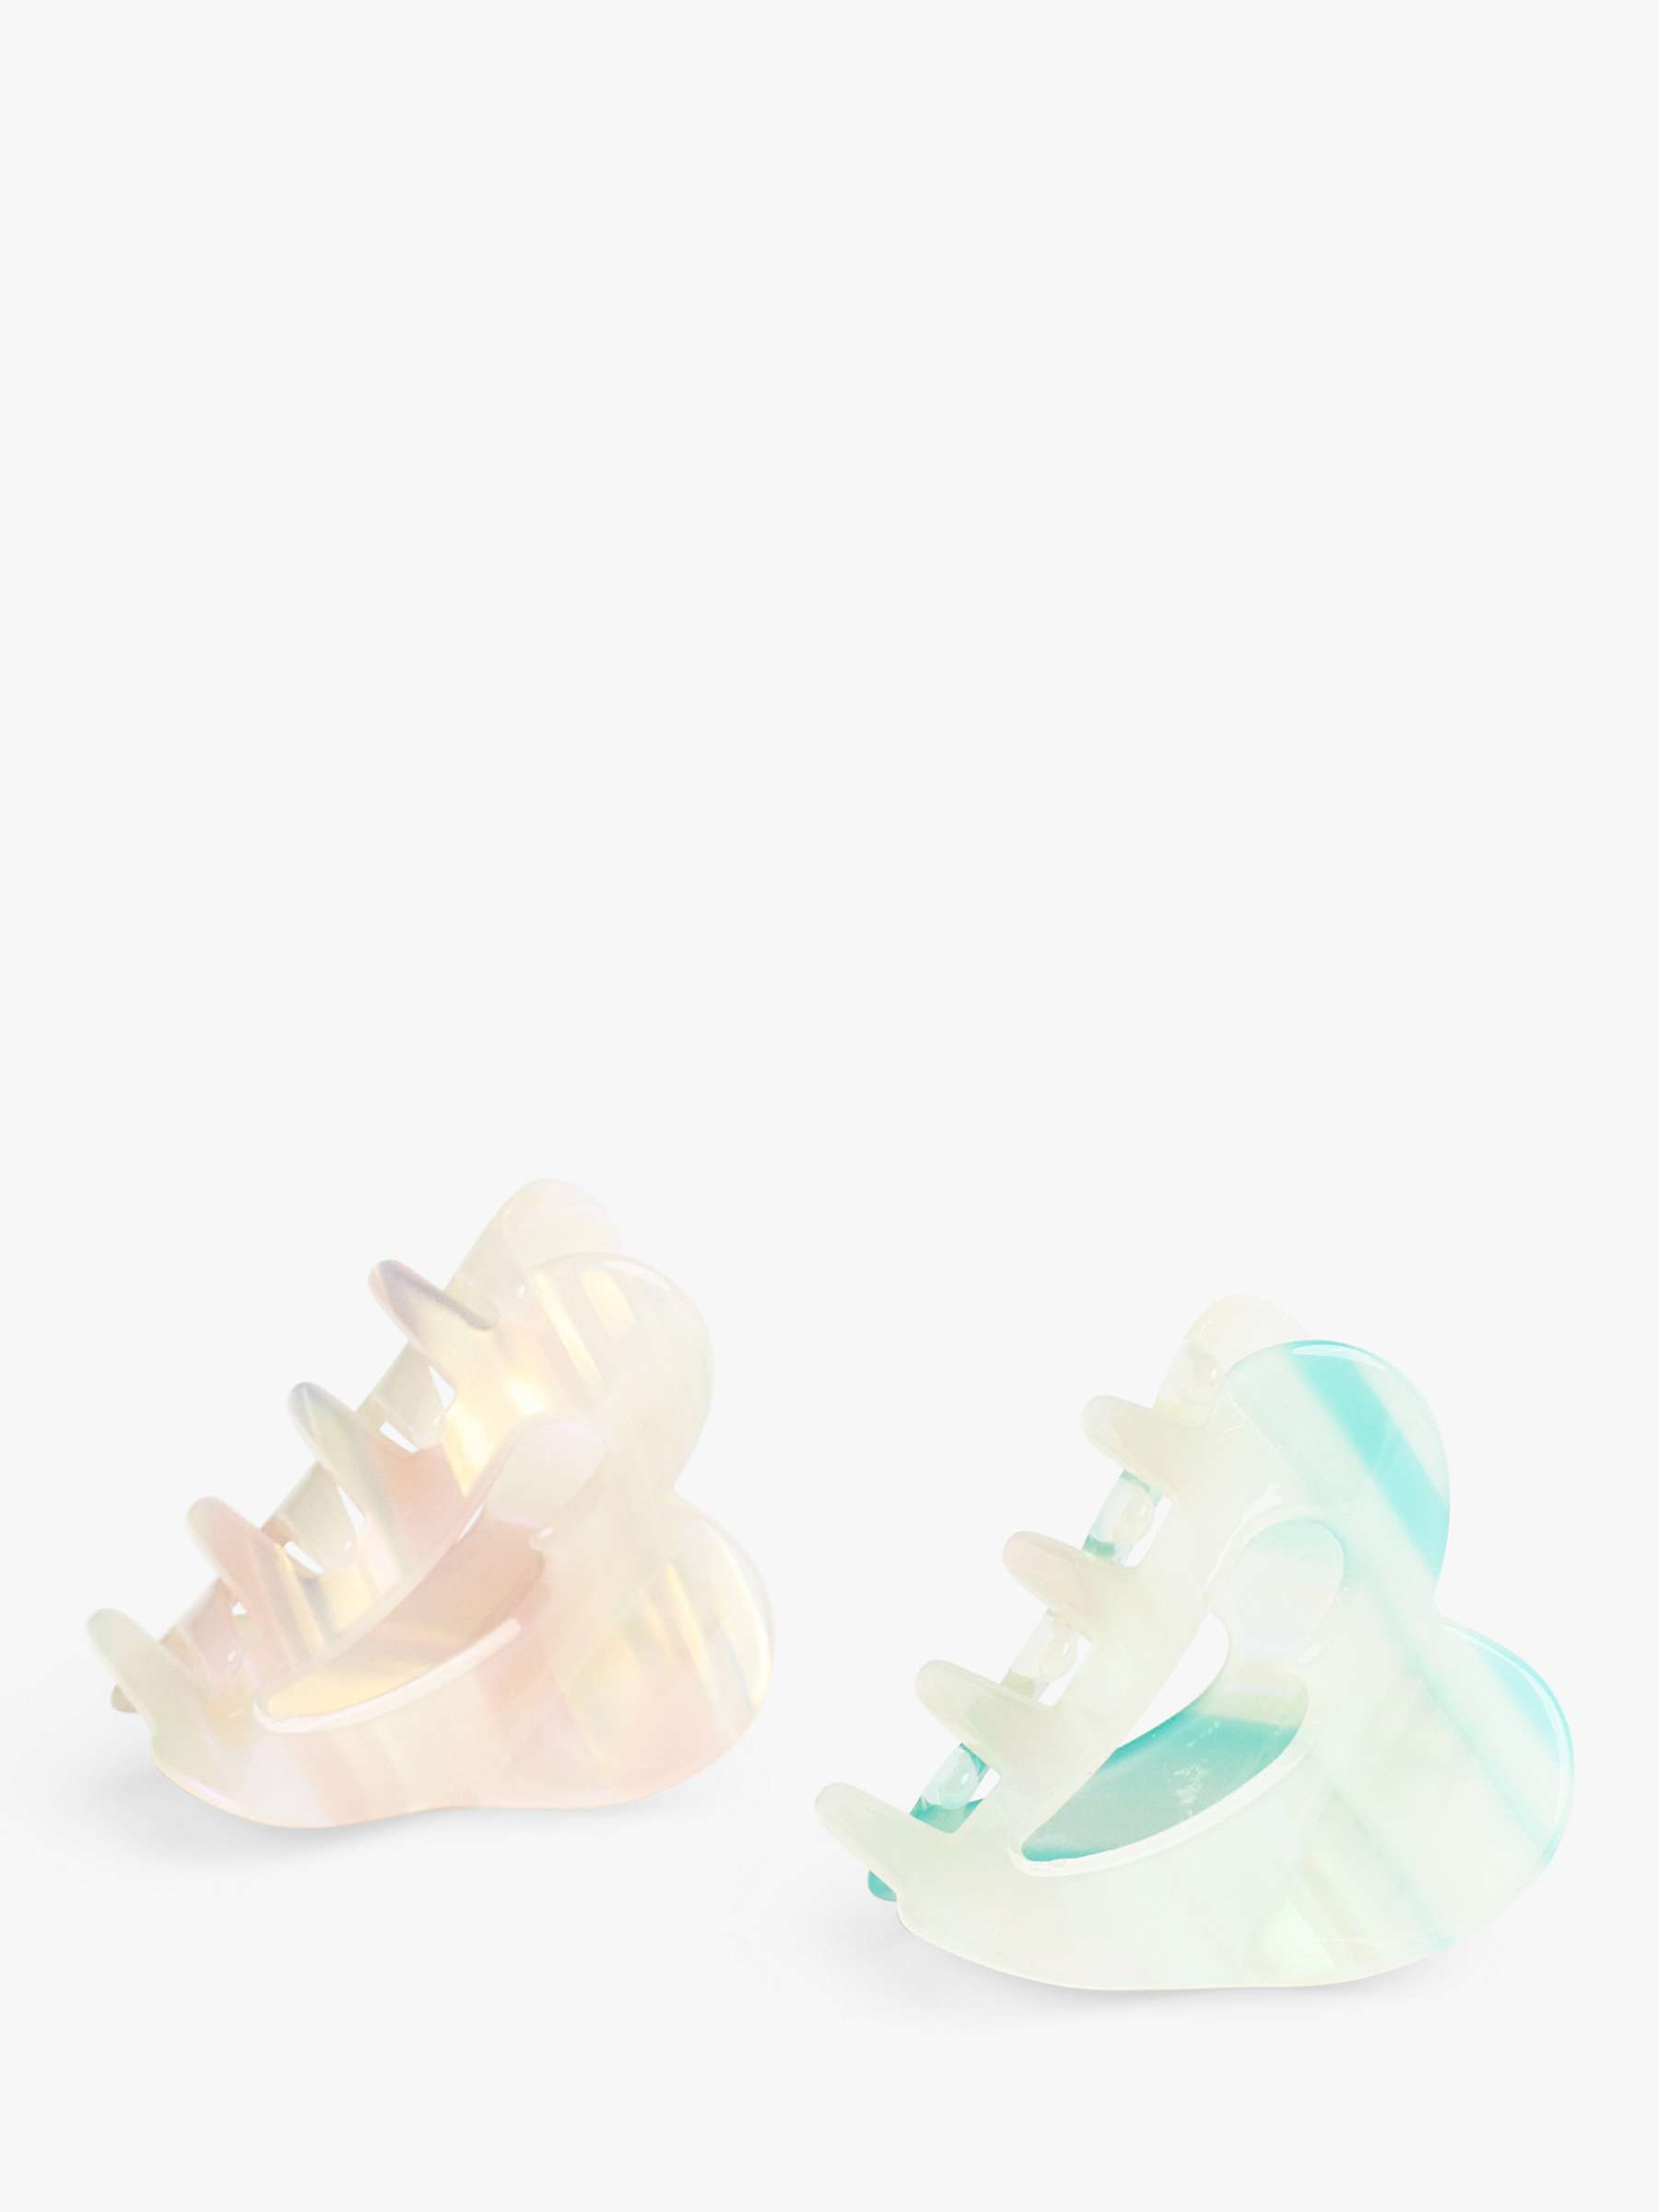 Buy Bloom & Bay Posey Heart Hair Claws, Set of 2, Pale Pink/Pale Green Online at johnlewis.com